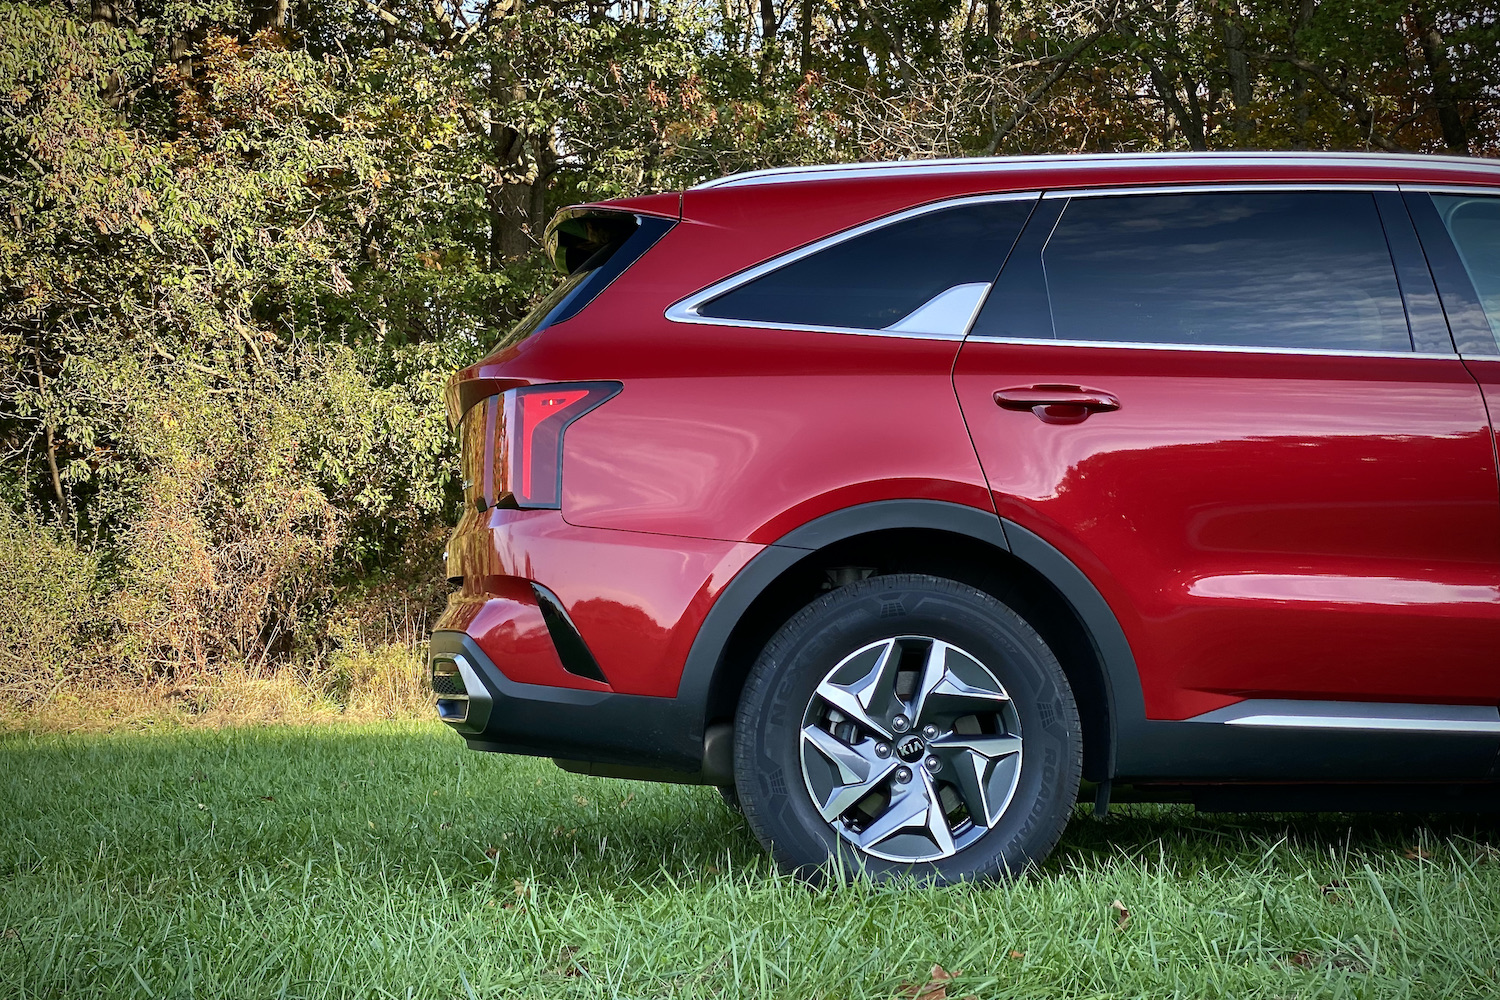 2021 Kia Sorento Hybrid Review: 7 Seats and Great MPG | Digital Trends